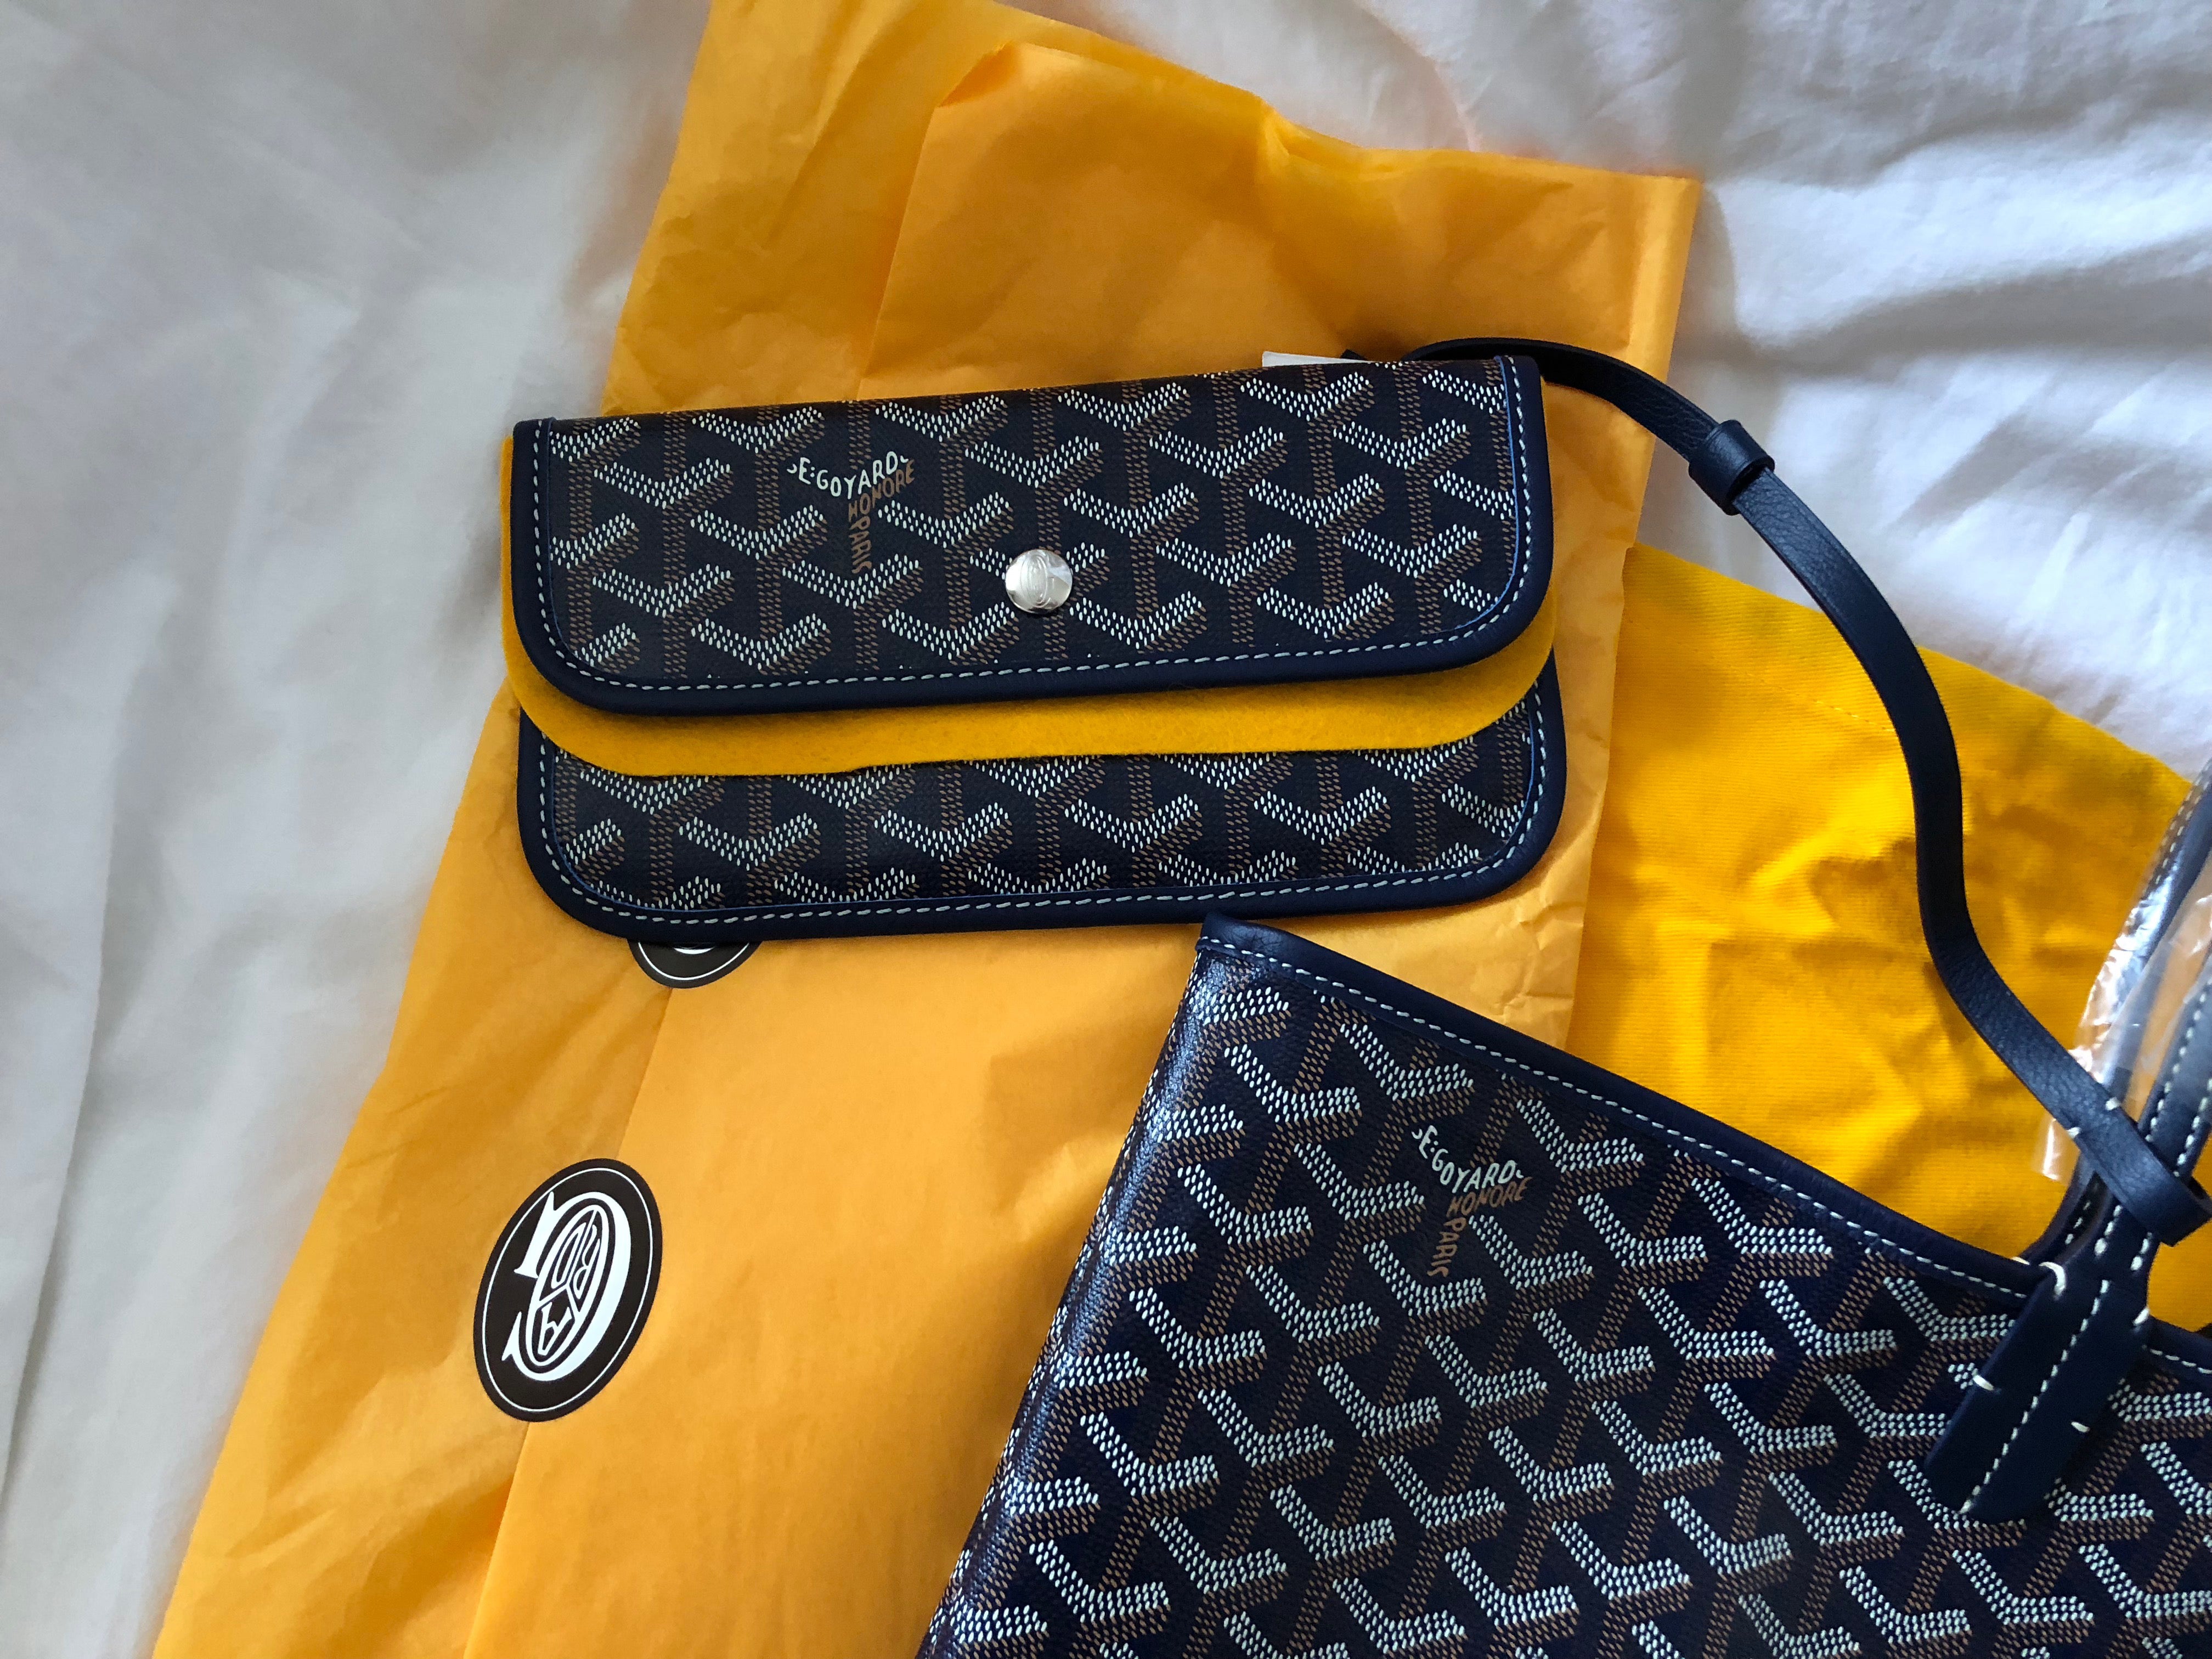 Review on St louis Navy blue PM size with organizer